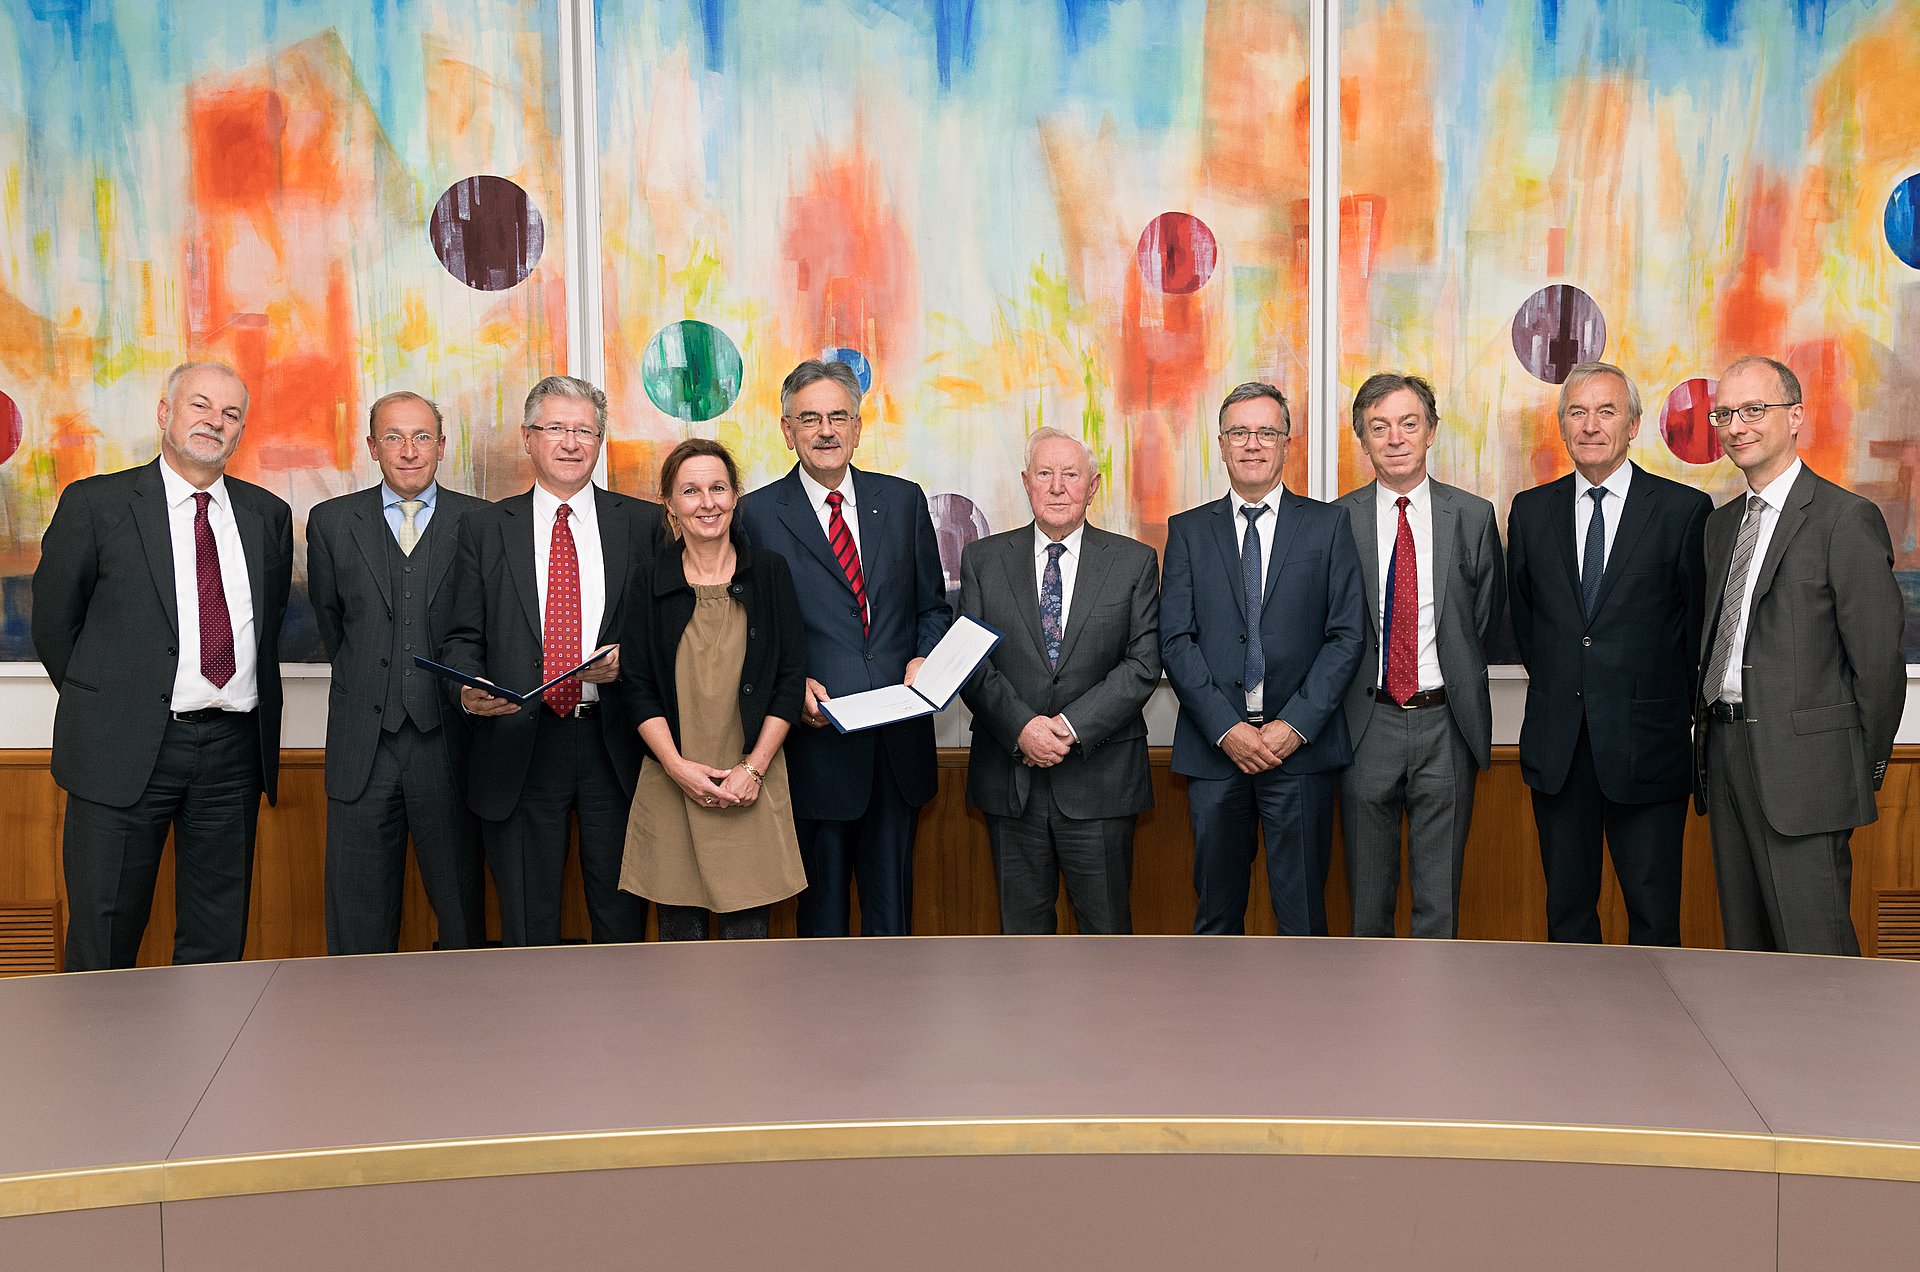 Signing of the contract with the chairmen, management board and other members of the Else Kröner-Fresenius-Stiftung, the three TUM professors, TUM President Herrmann and representatives of TUM fundraising. (Picture: Benz/ TUM)